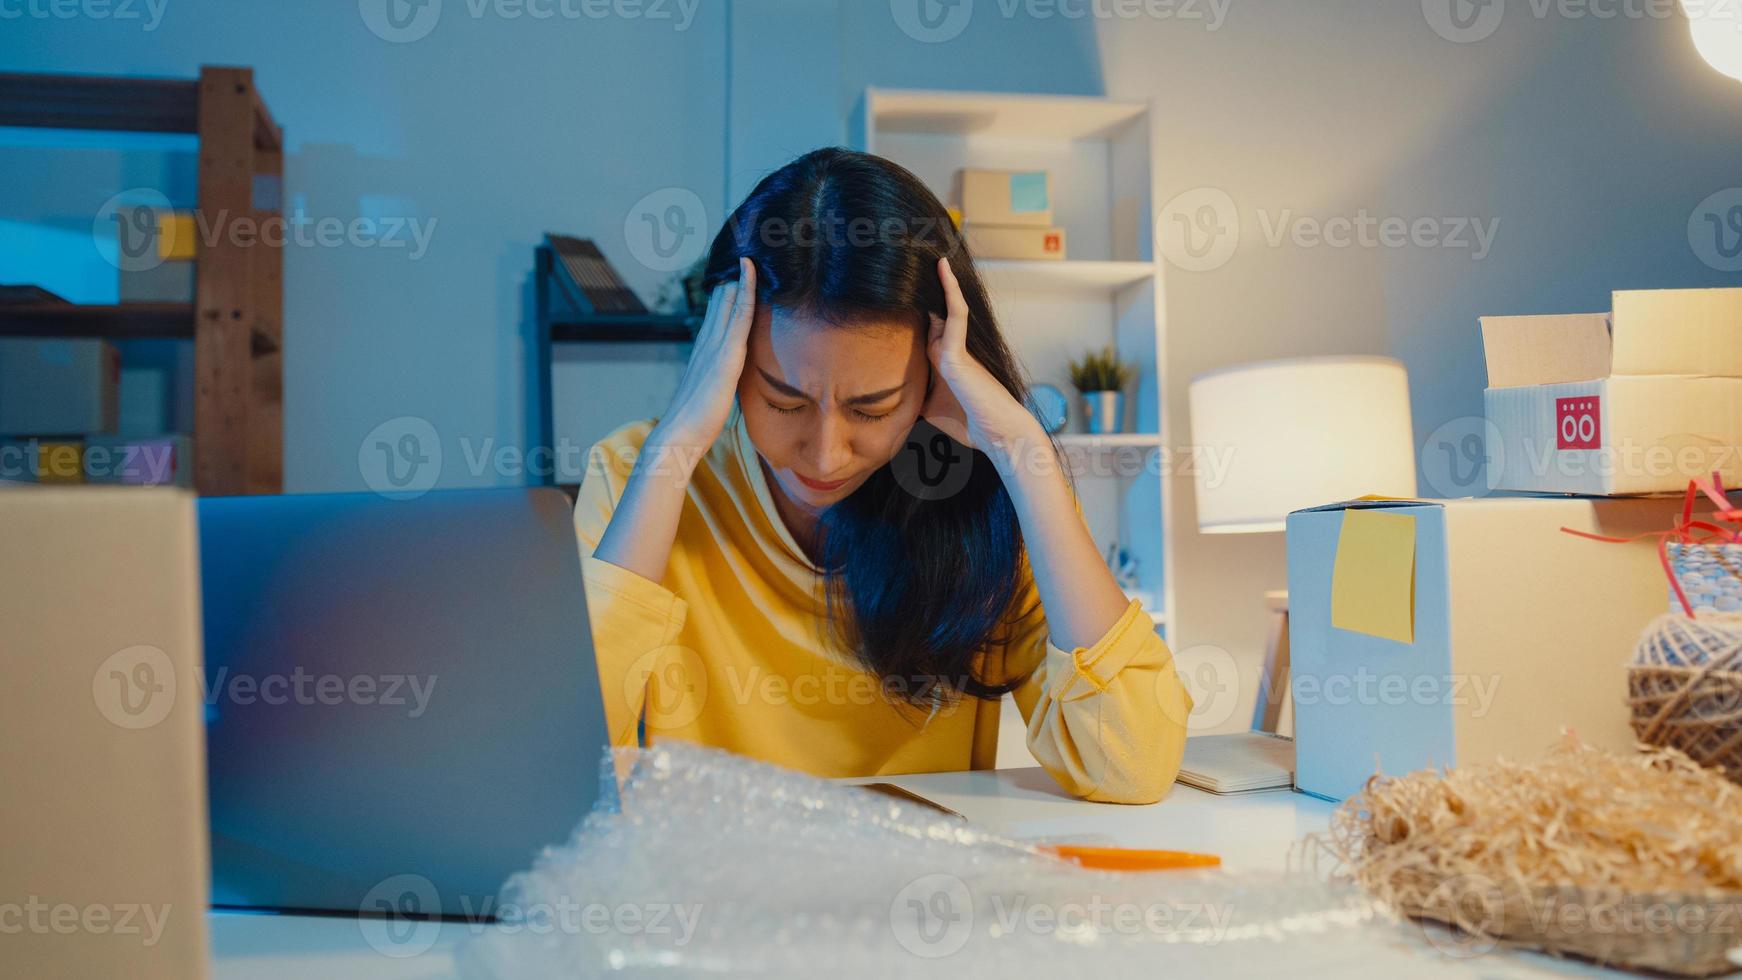 Young Asia businesswoman look around room full of product stuff and parcel box feel stress and upset with bad sell in home office at night. Small business owner, online market delivery concept. photo